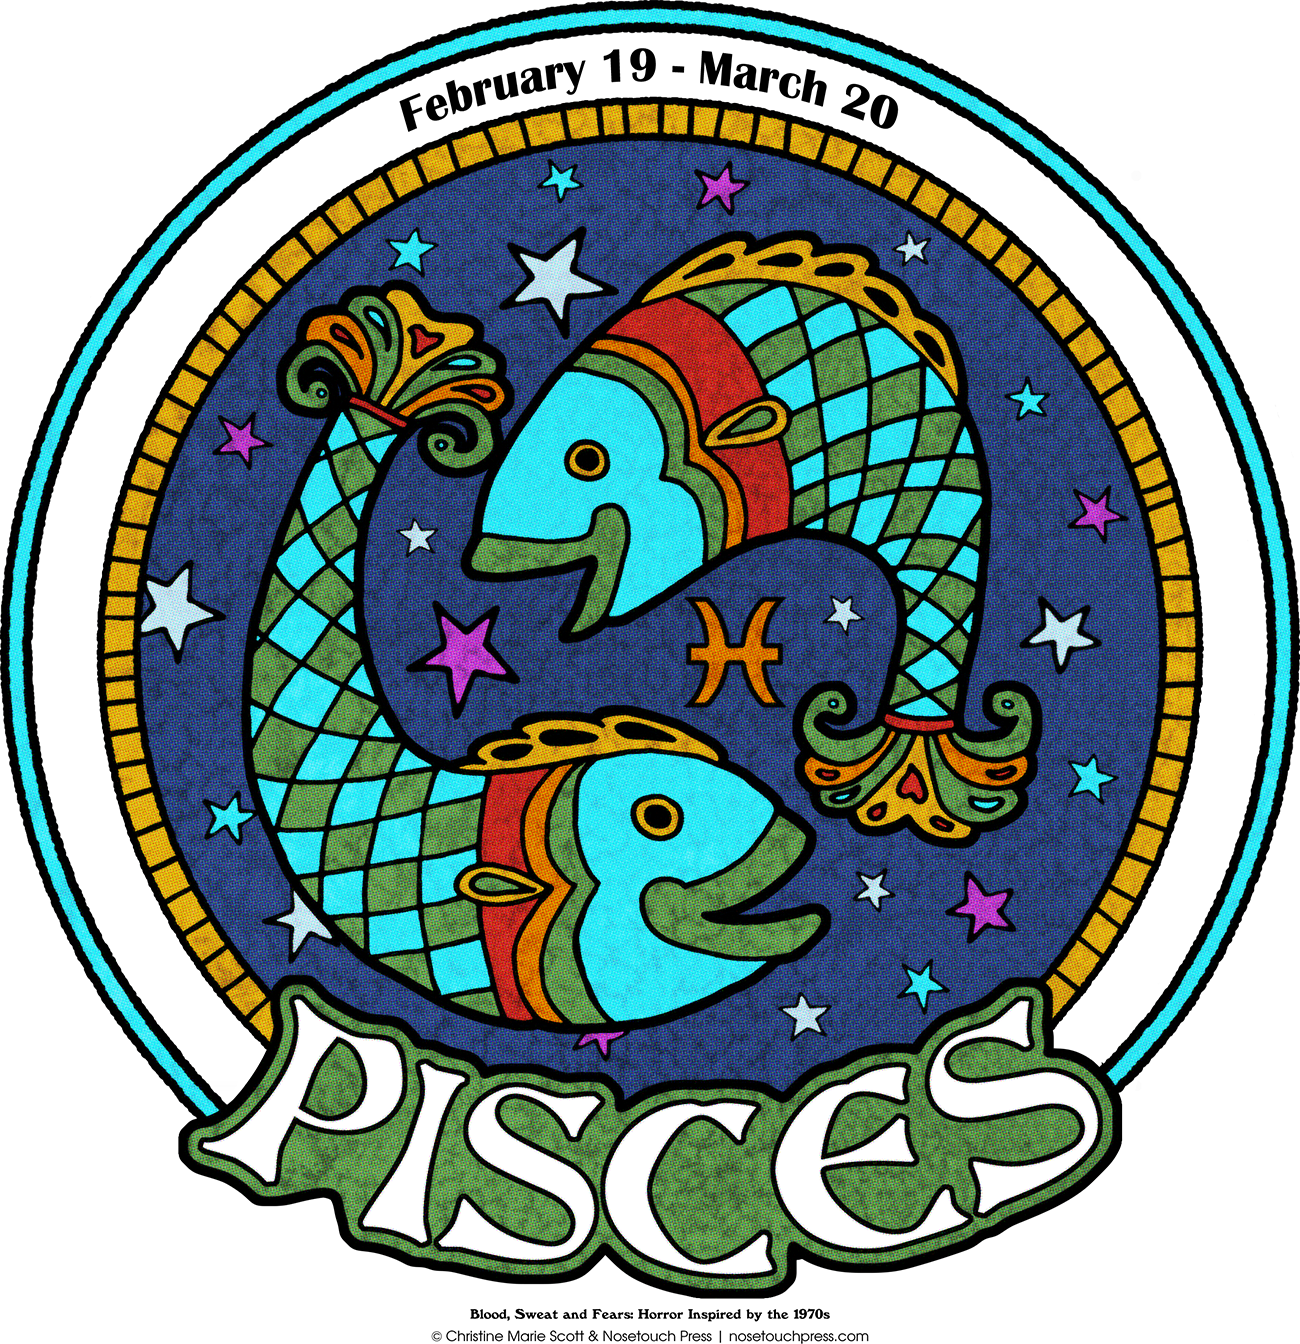 Pisces Whats Your Sign Nosetouch Press Blood Sweat And Fears